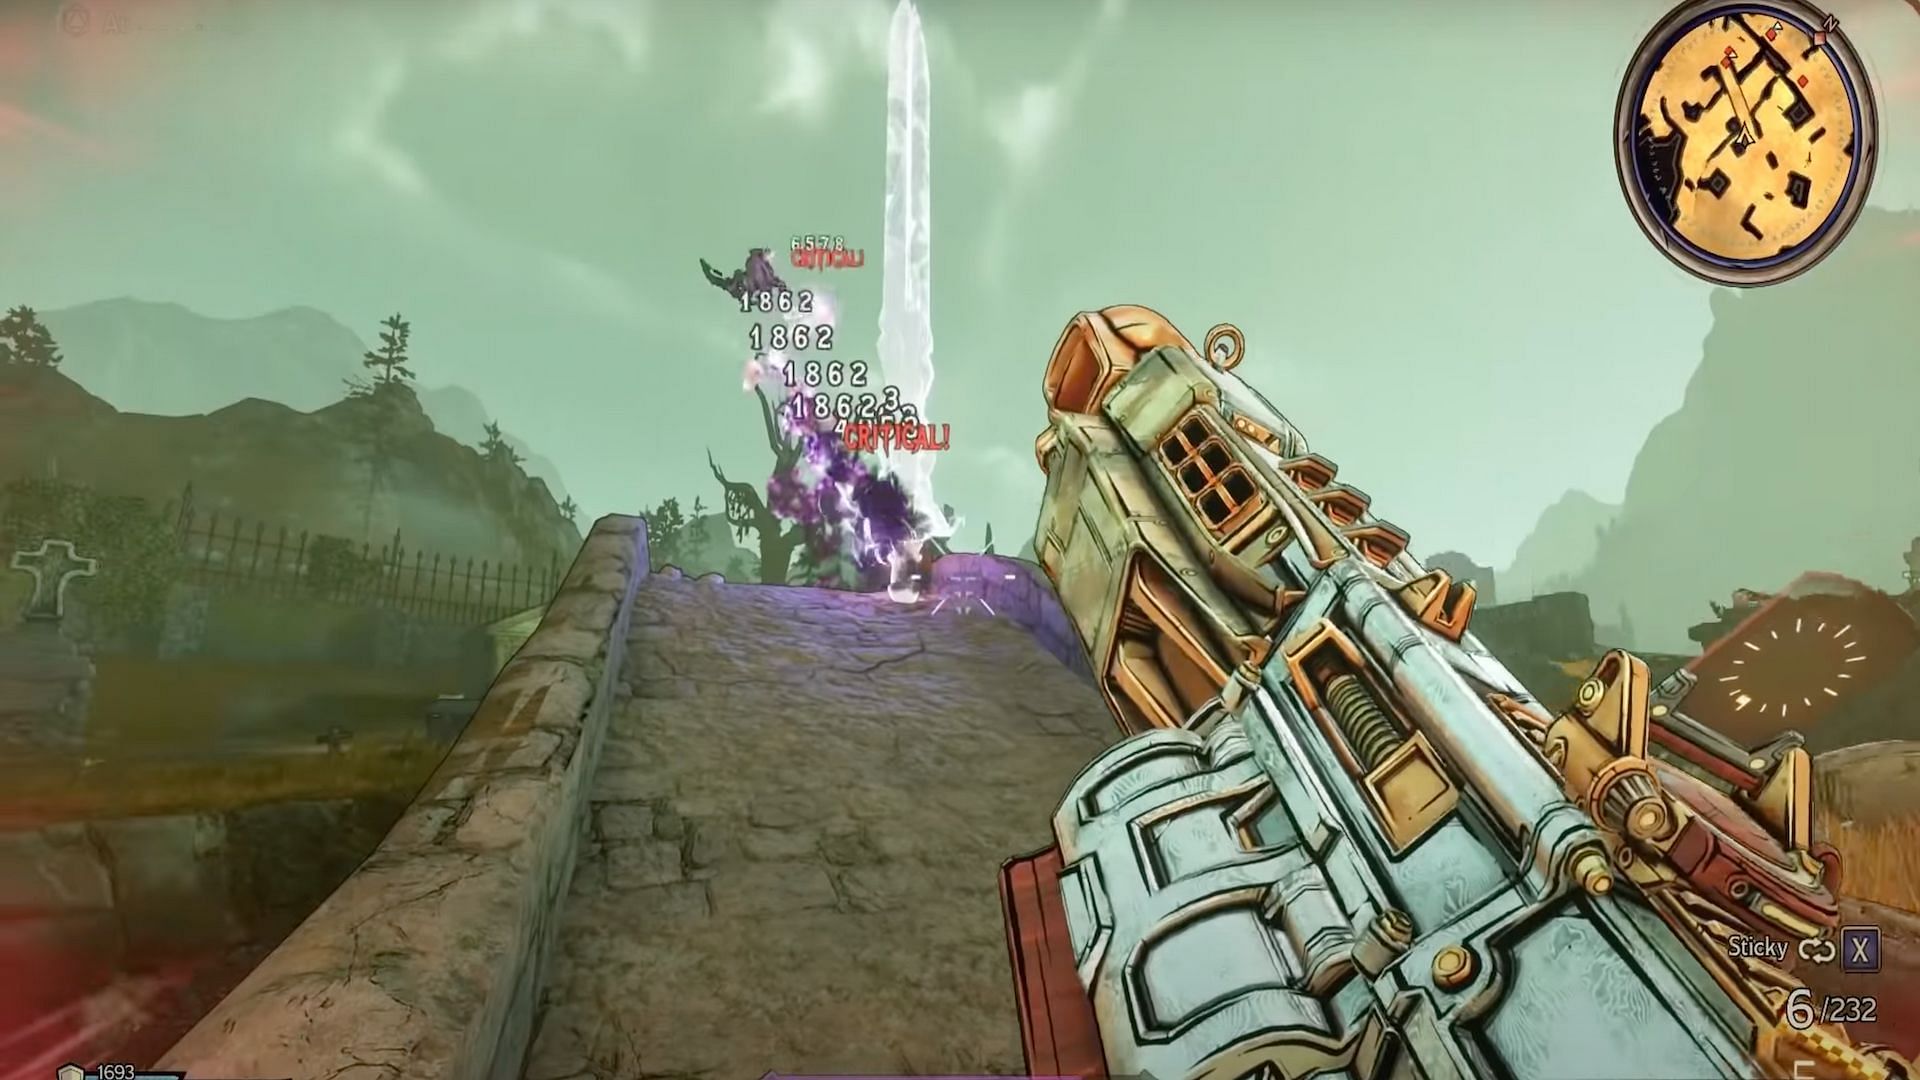 Players of Tiny Tina&#039;s Wonderlands can use the explosive power of Torgue to destroy their enemies (Image via Joltzdude139/YouTube)